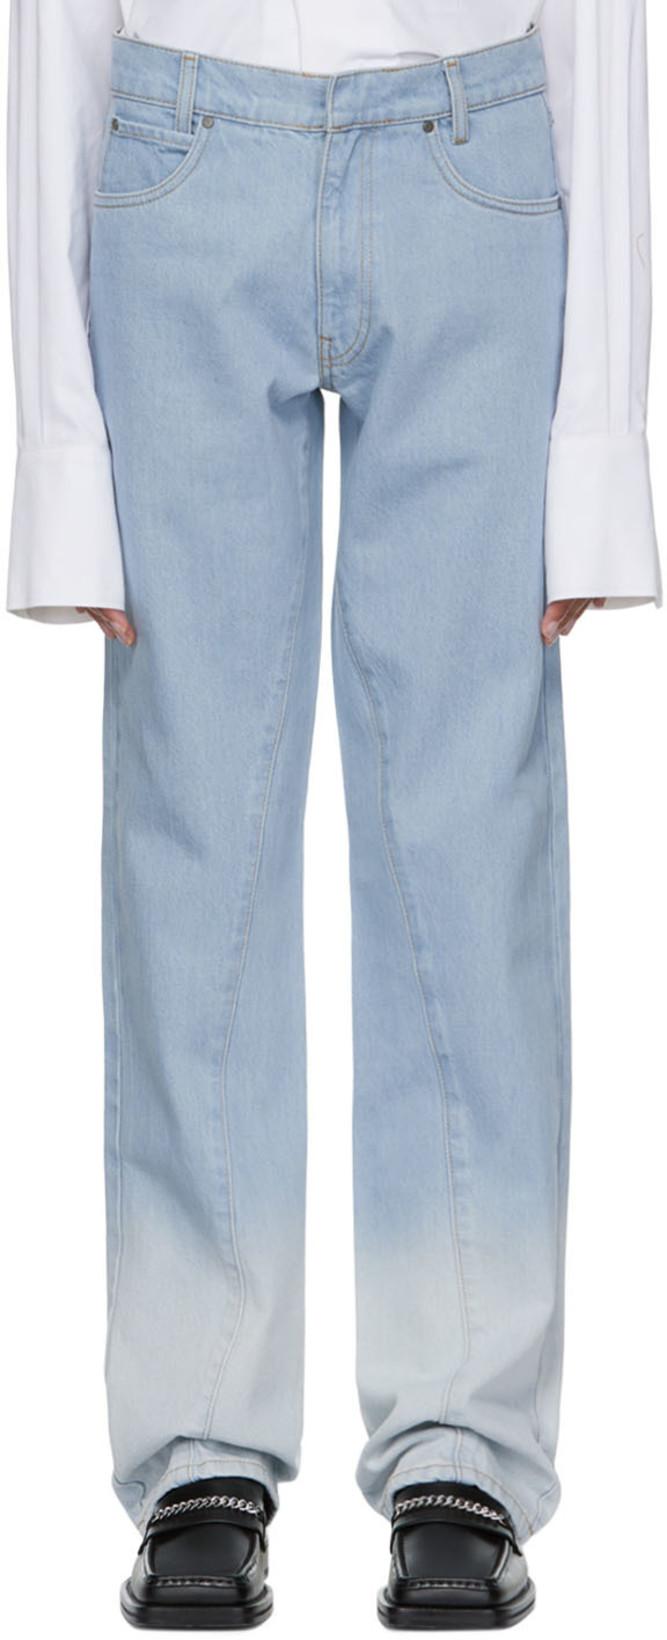 Blue Straight Leg Jeans by BIANCA SAUNDERS